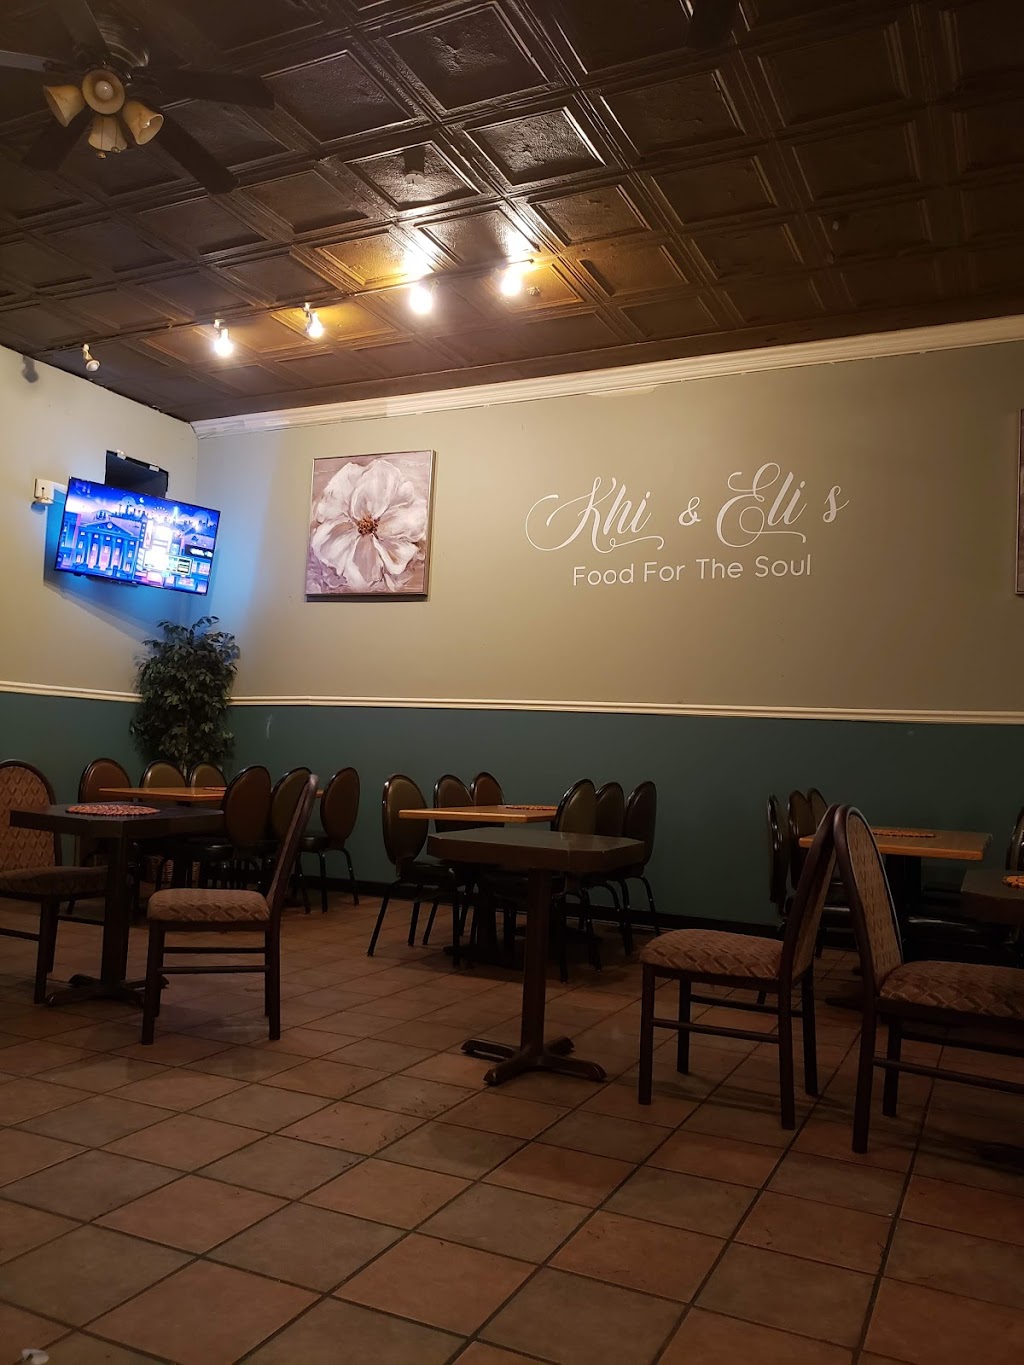 Khi & Elis Food For The Soul | 882 Sumner Ave, Springfield, MA 01108 | Phone: (413) 732-0860